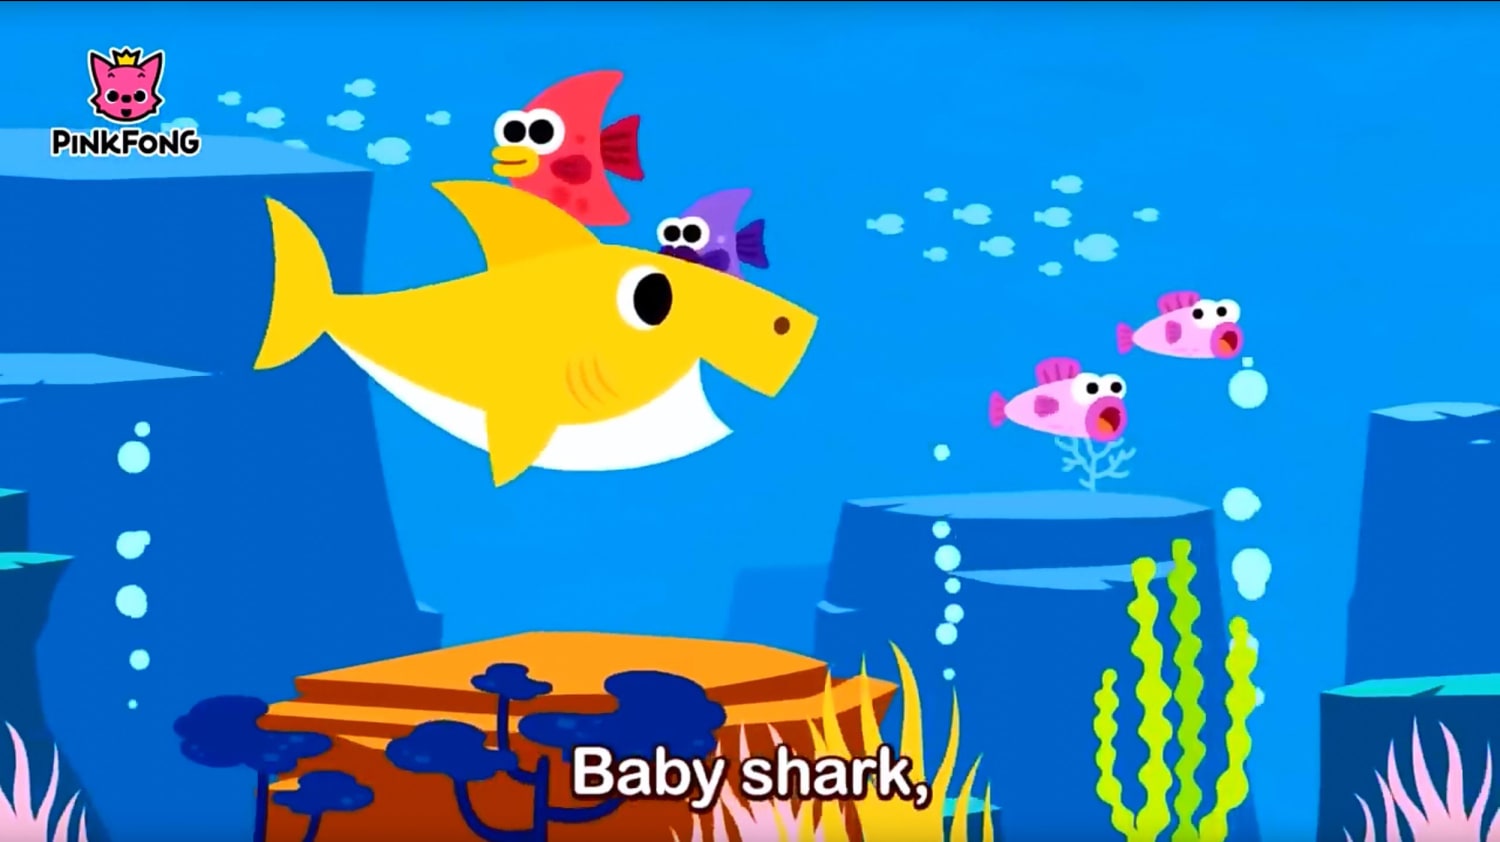 Baby Shark Is An Online Children S Song That Has Taken A Bite Out Of Billboard Hot 100